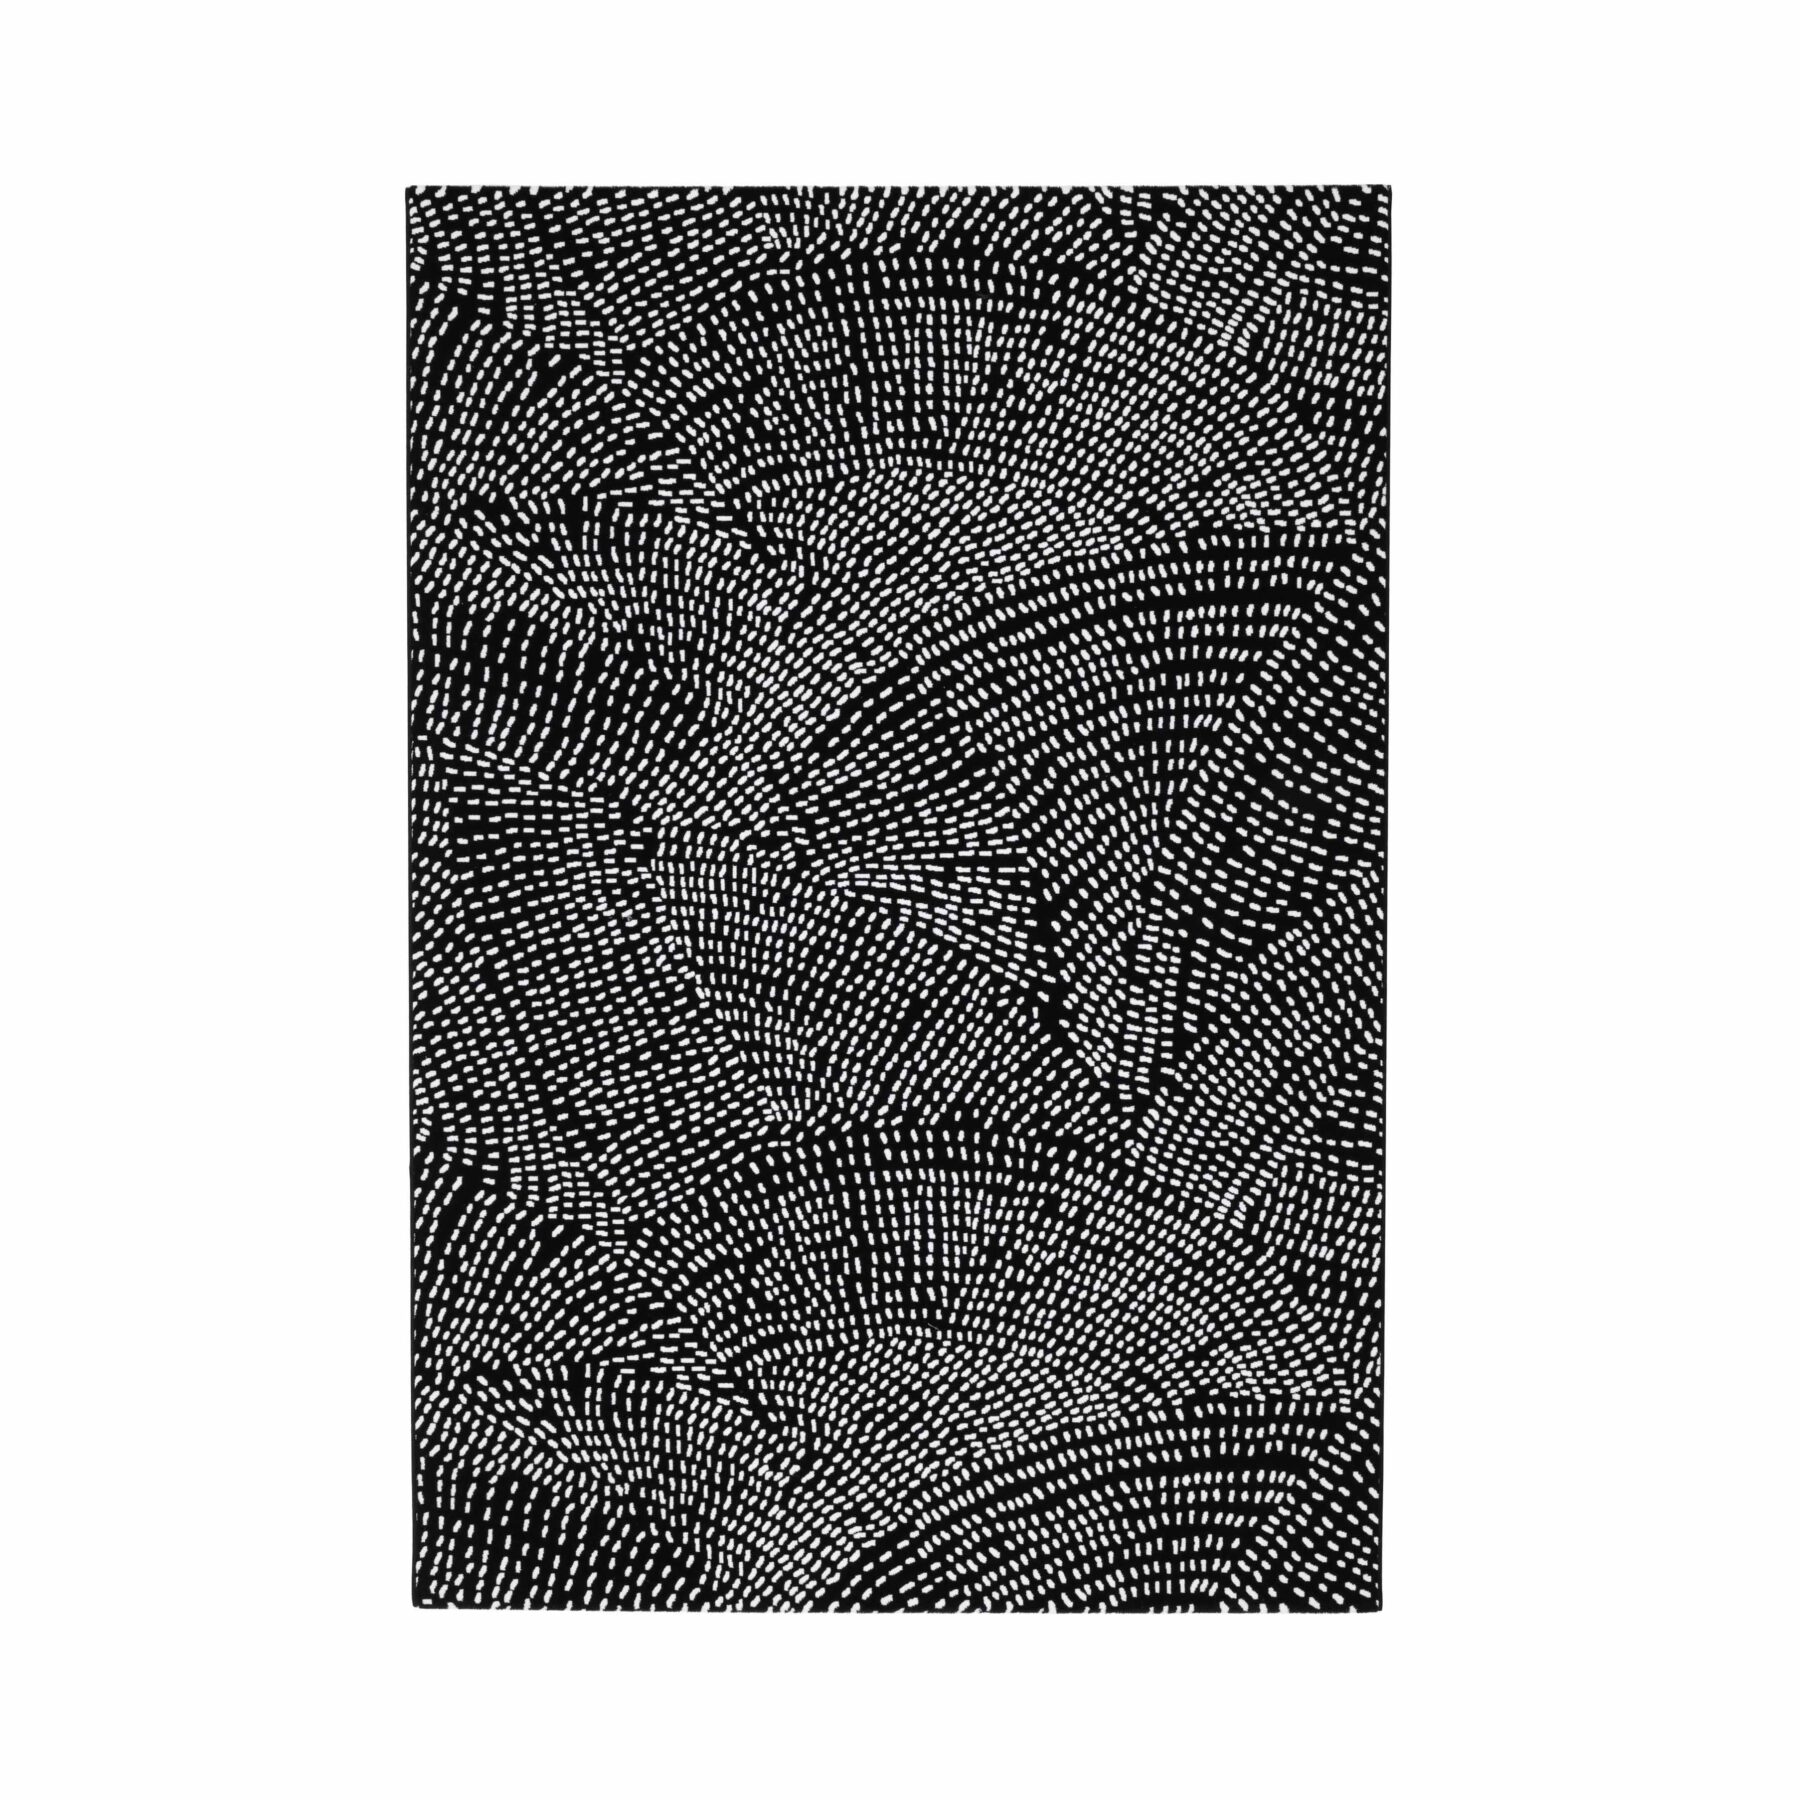 full view of Tiago indoor rug spotted design black background with white spots